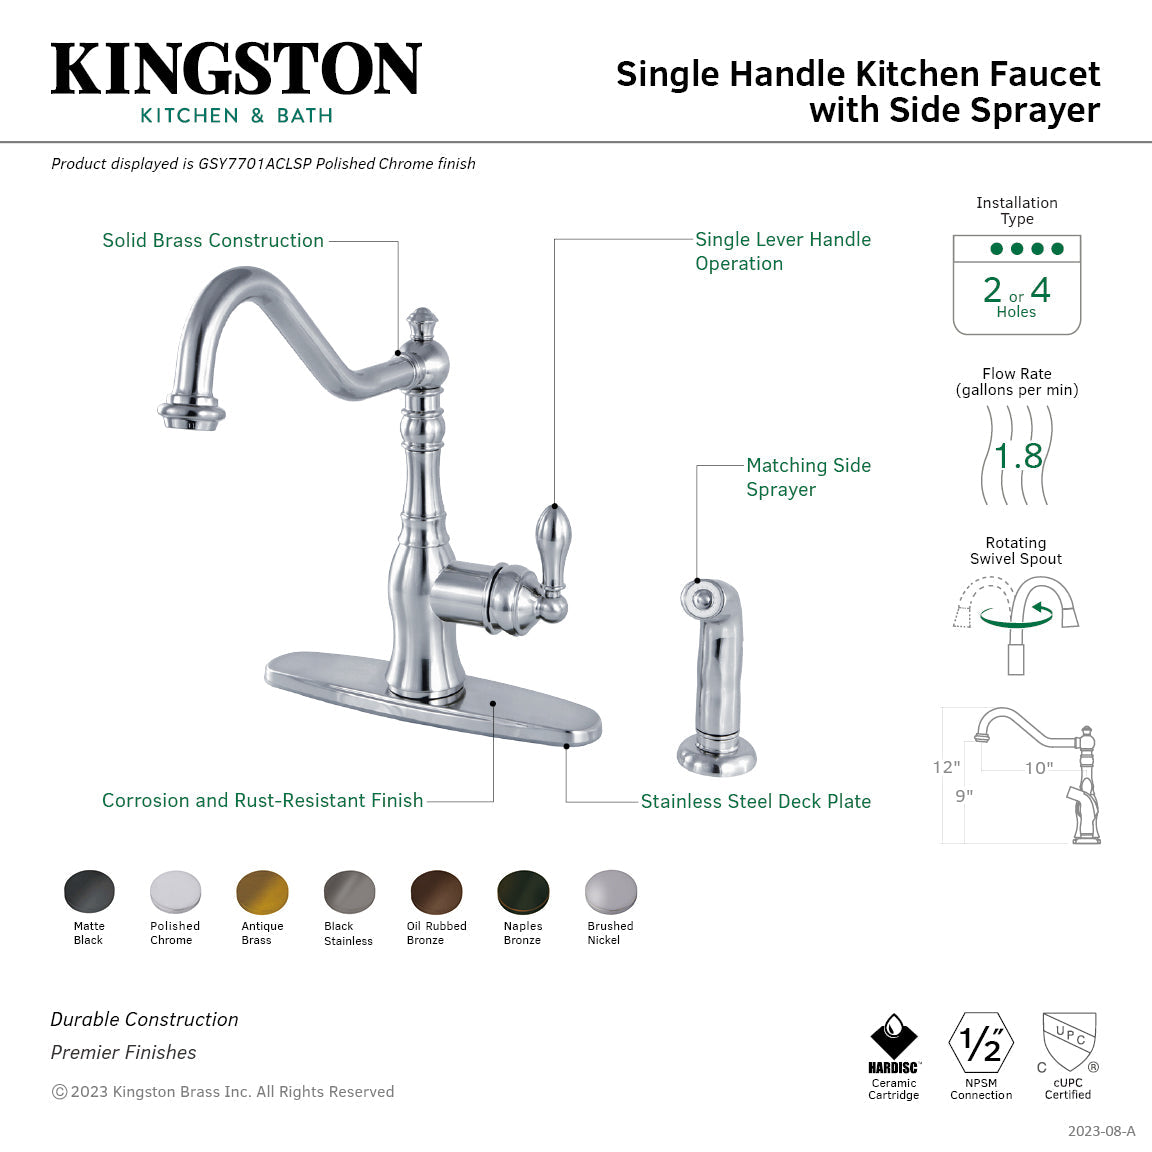 American Classic GSY7700ACLSP Single-Handle 2-or-4 Hole Deck Mount Kitchen Faucet with Brass Sprayer, Matte Black